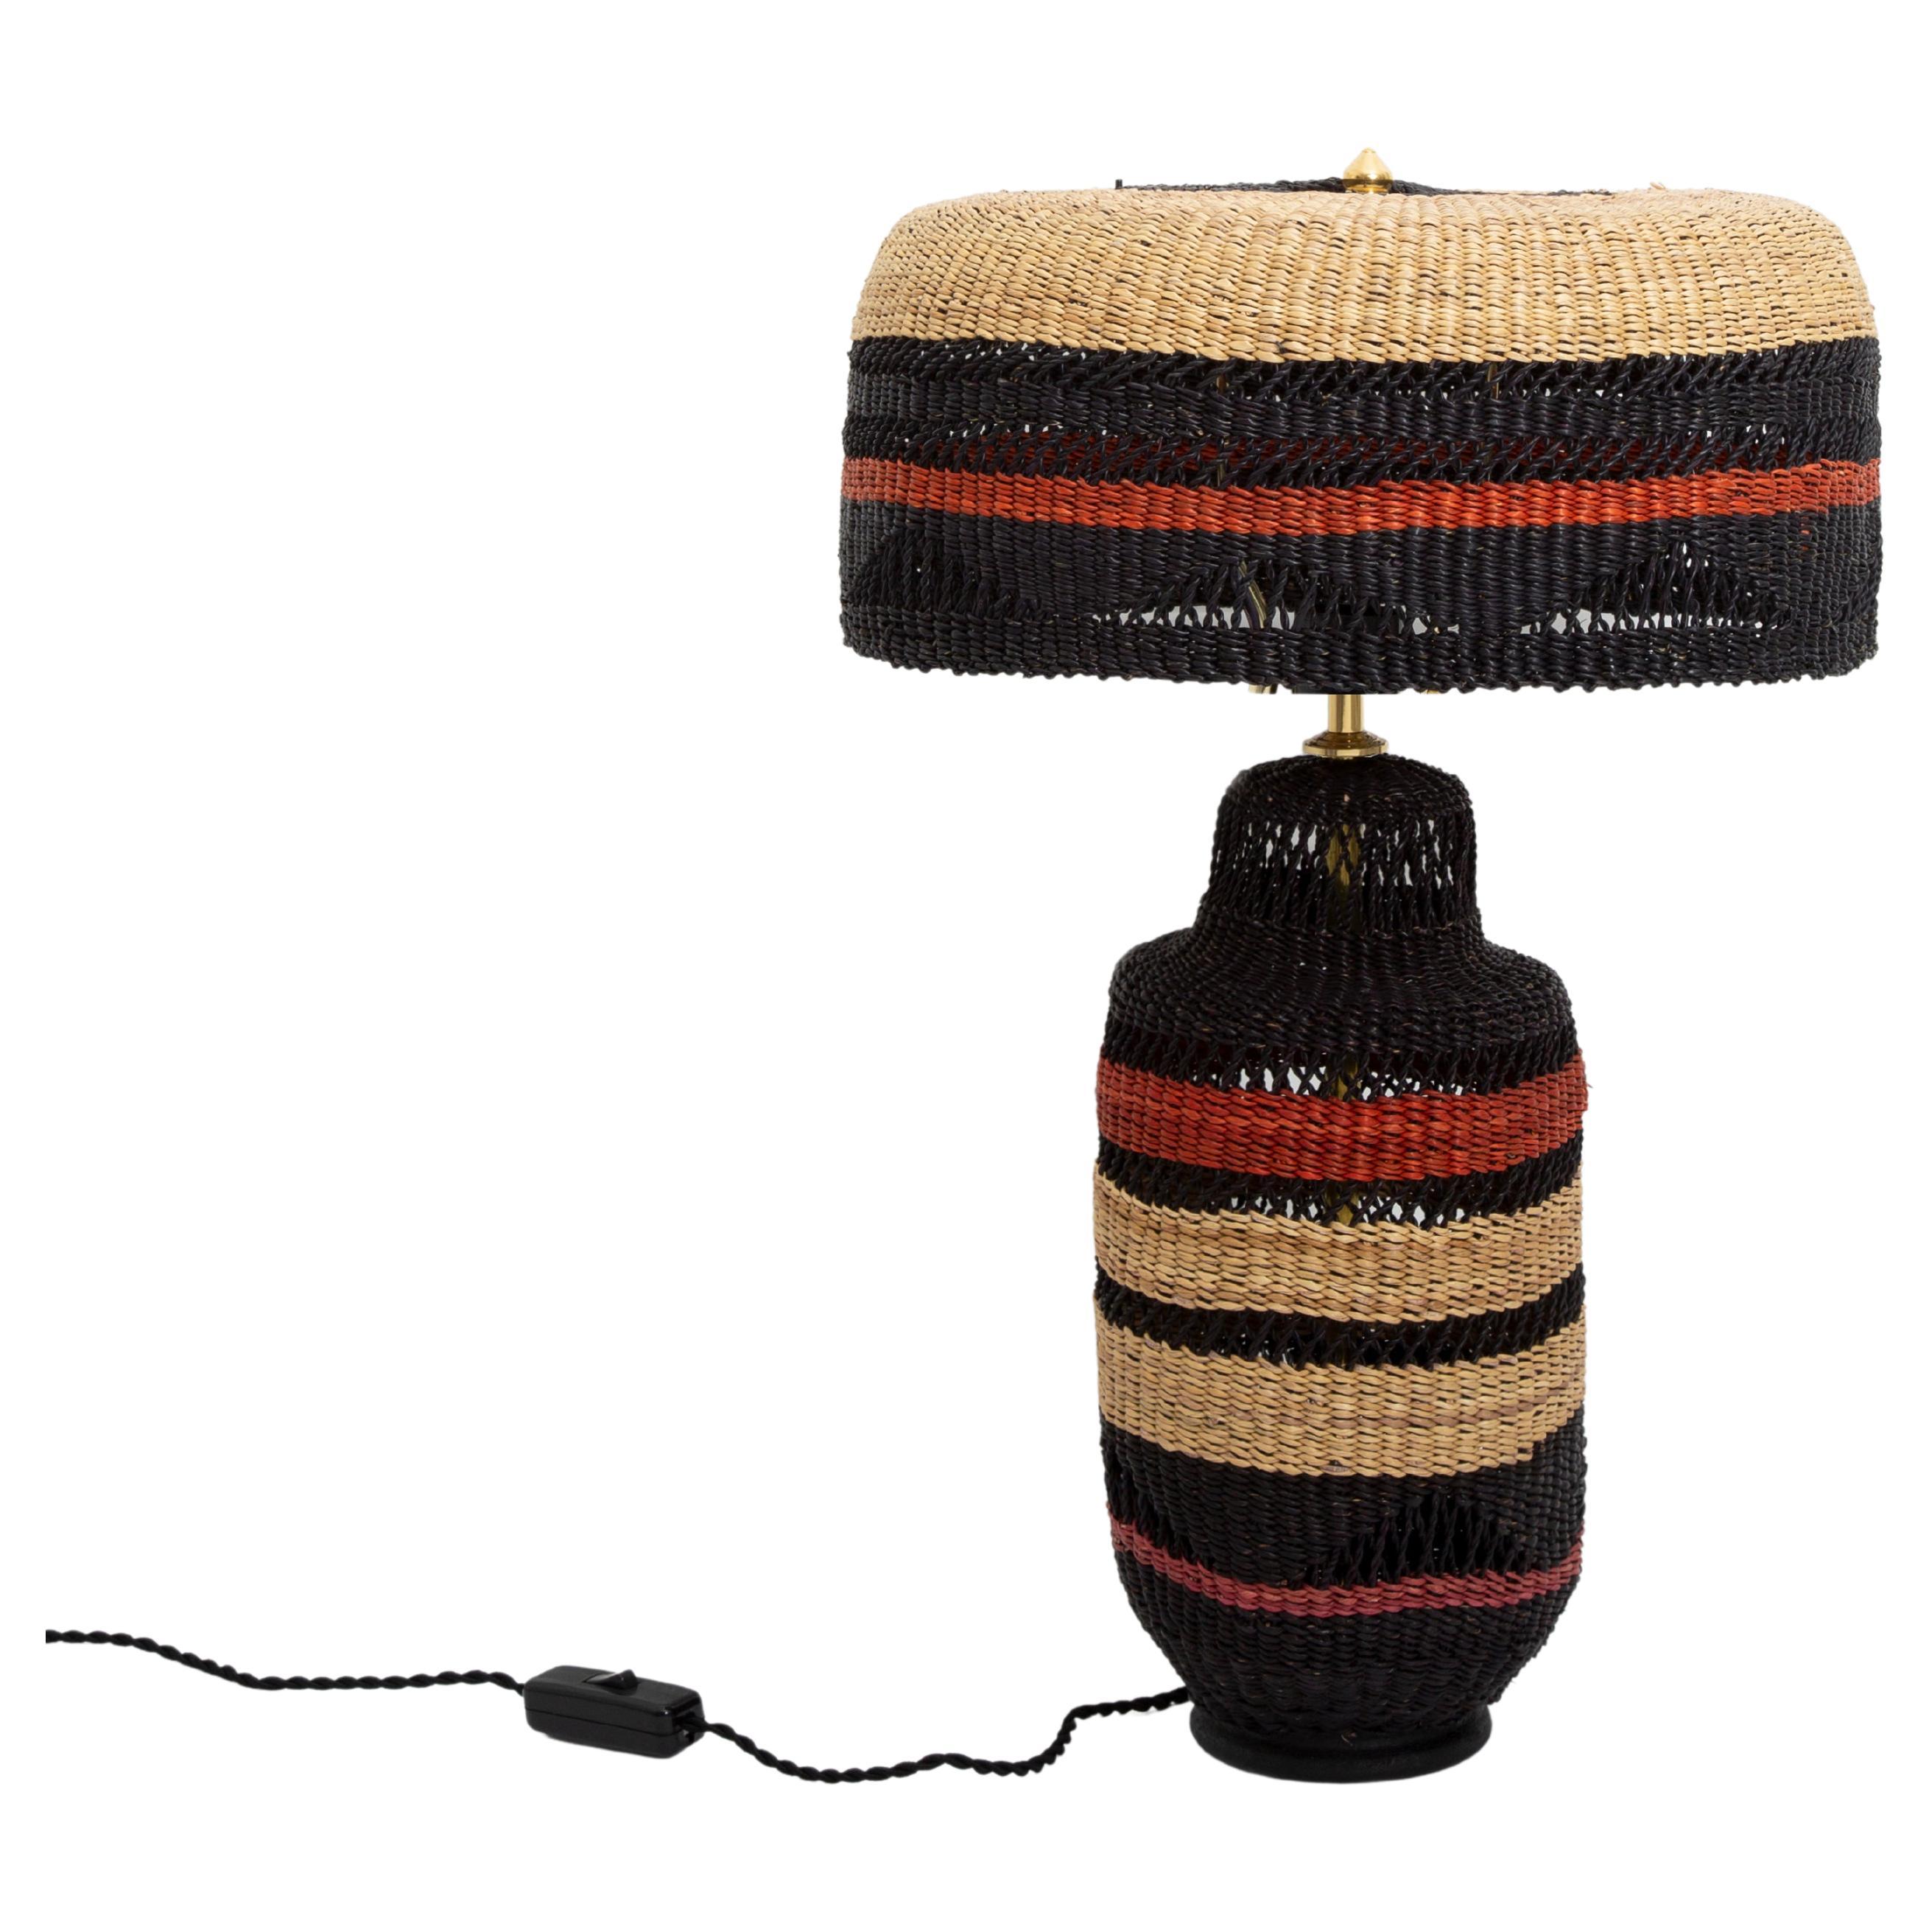 Contemporary Ethnic Table Lamp Striped Handwoven Straw Black Terracotta